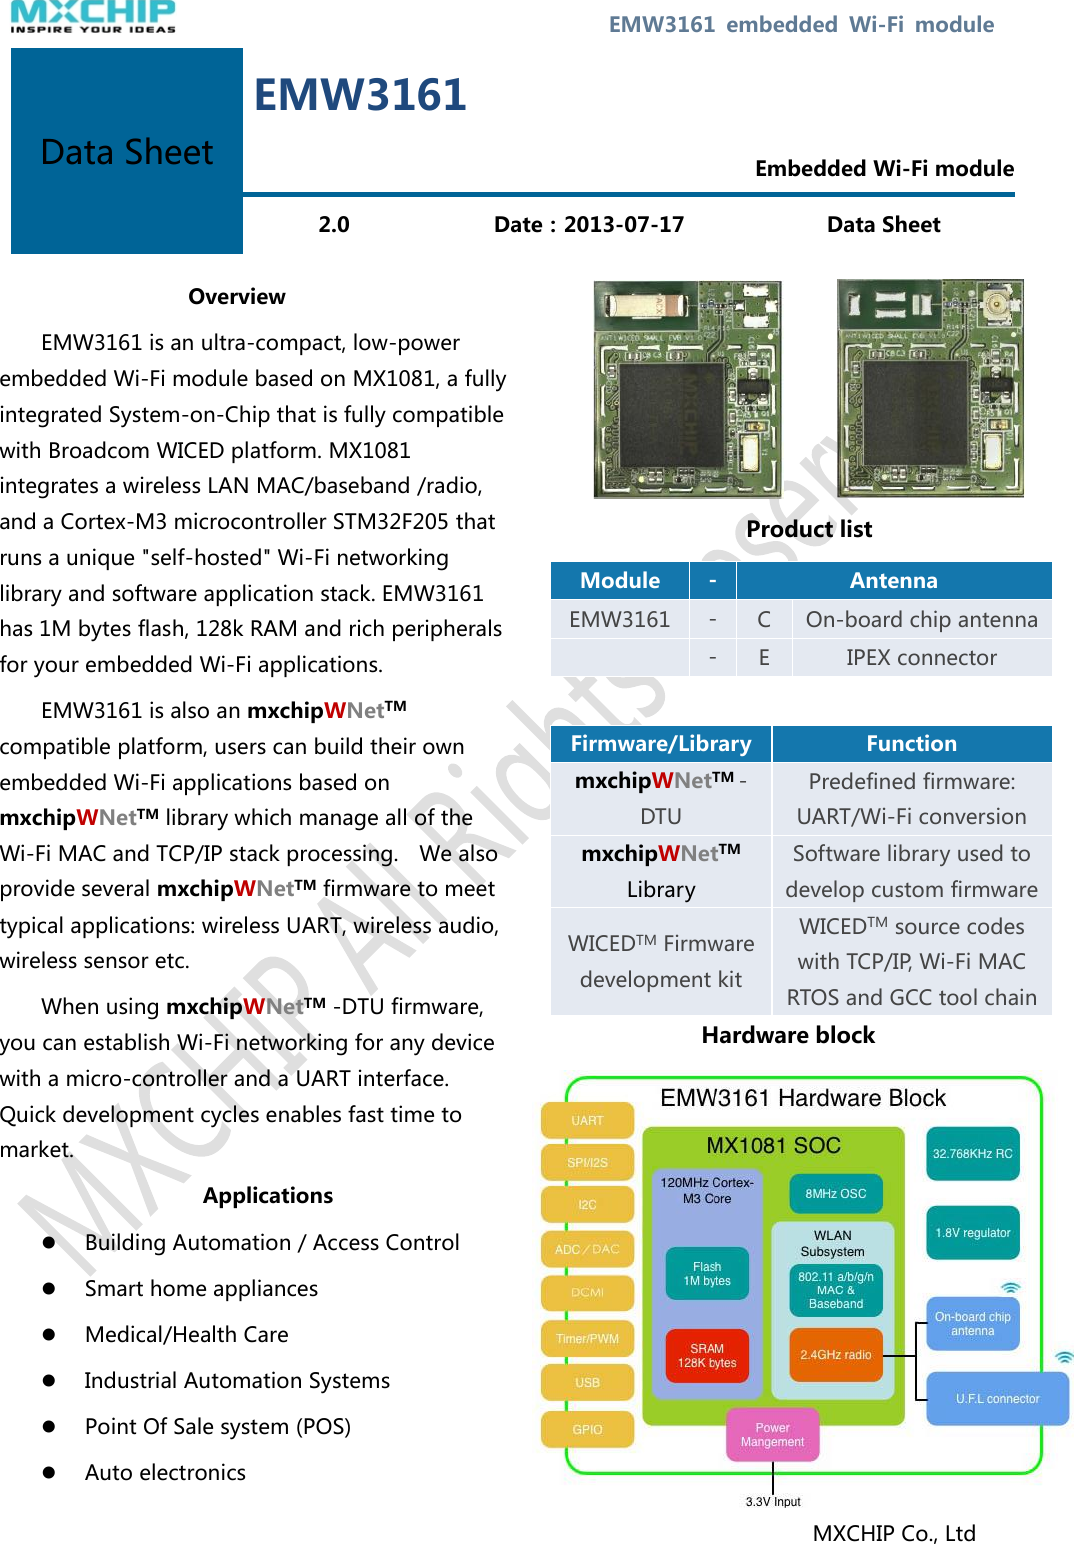  EMW3161  embedded  Wi-Fi  module   Overview EMW3161 is an ultra-compact, low-power embedded Wi-Fi module based on MX1081, a fully integrated System-on-Chip that is fully compatible with Broadcom WICED platform. MX1081 integrates a wireless LAN MAC/baseband /radio, and a Cortex-M3 microcontroller STM32F205 that runs a unique &quot;self-hosted&quot; Wi-Fi networking library and software application stack. EMW3161 has 1M bytes flash, 128k RAM and rich peripherals for your embedded Wi-Fi applications. EMW3161 is also an mxchipWNetTM compatible platform, users can build their own embedded Wi-Fi applications based on mxchipWNetTM library which manage all of the Wi-Fi MAC and TCP/IP stack processing.    We also provide several mxchipWNetTM firmware to meet typical applications: wireless UART, wireless audio, wireless sensor etc. When using mxchipWNetTM -DTU firmware, you can establish Wi-Fi networking for any device with a micro-controller and a UART interface. Quick development cycles enables fast time to market.   Applications  Building Automation / Access Control  Smart home appliances  Medical/Health Care  Industrial Automation Systems  Point Of Sale system (POS)  Auto electronics         Product list Module - Antenna EMW3161 - C On-board chip antenna  - E IPEX connector  Firmware/Library Function mxchipWNetTM -DTU Predefined firmware: UART/Wi-Fi conversion mxchipWNetTM   Library Software library used to develop custom firmware WICEDTM Firmware development kit WICEDTM source codes with TCP/IP, Wi-Fi MAC RTOS and GCC tool chain   Hardware block            MXCHIP Co., Ltd Data Sheet EMW3161  Embedded Wi-Fi module 2.0 Date：2013-07-17 Data Sheet 